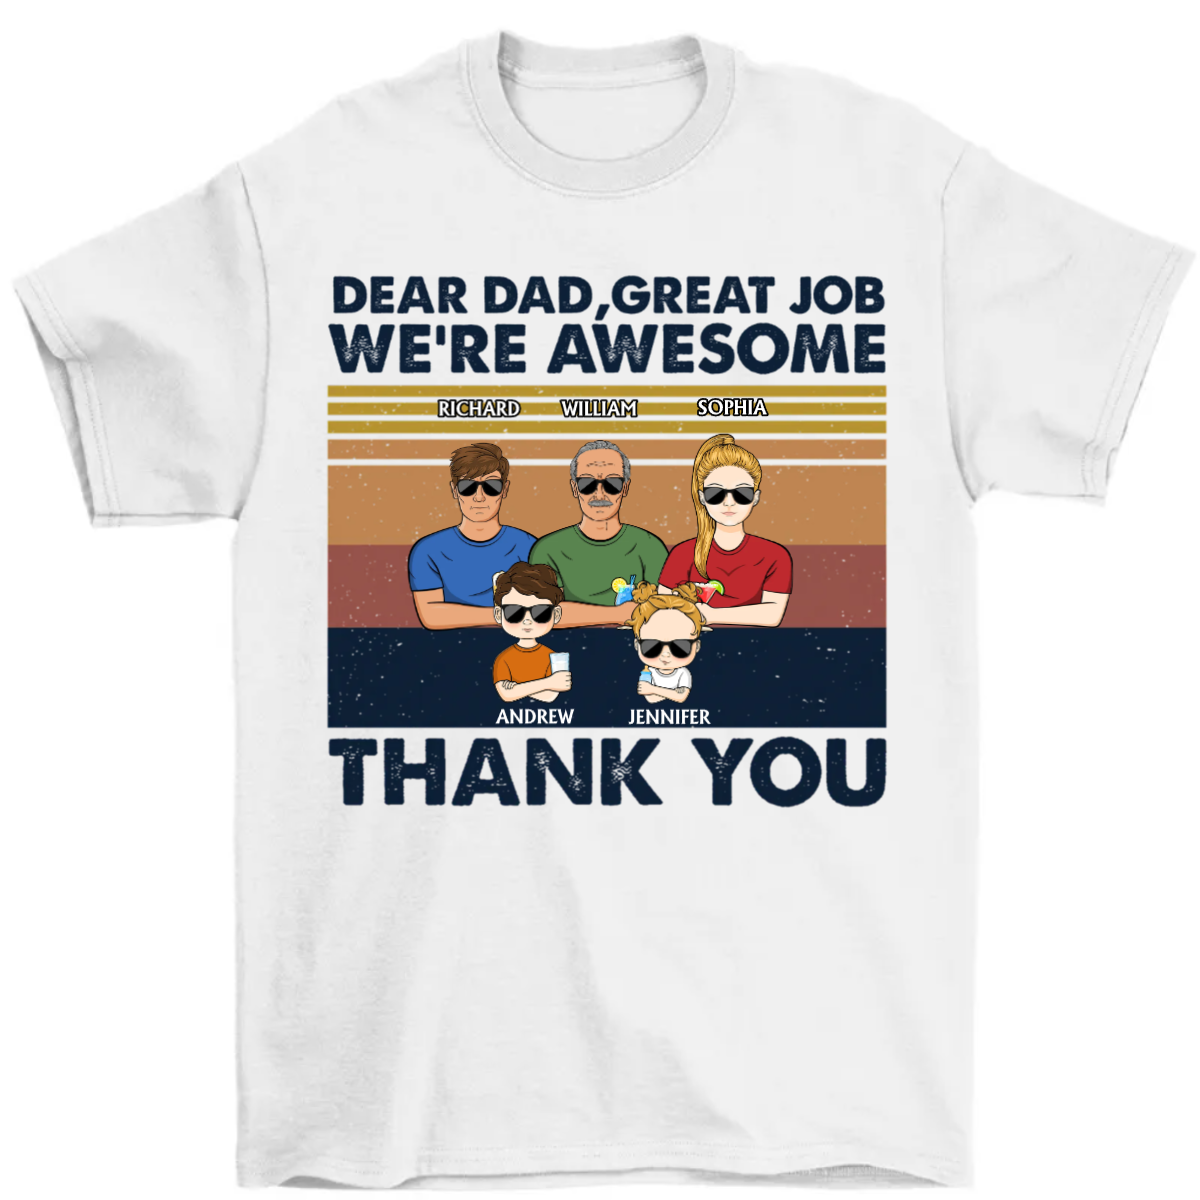 Dear Dad Great Job We're Awesome Thank You Adult And Kid - Father Gift - Personalized Custom T Shirt